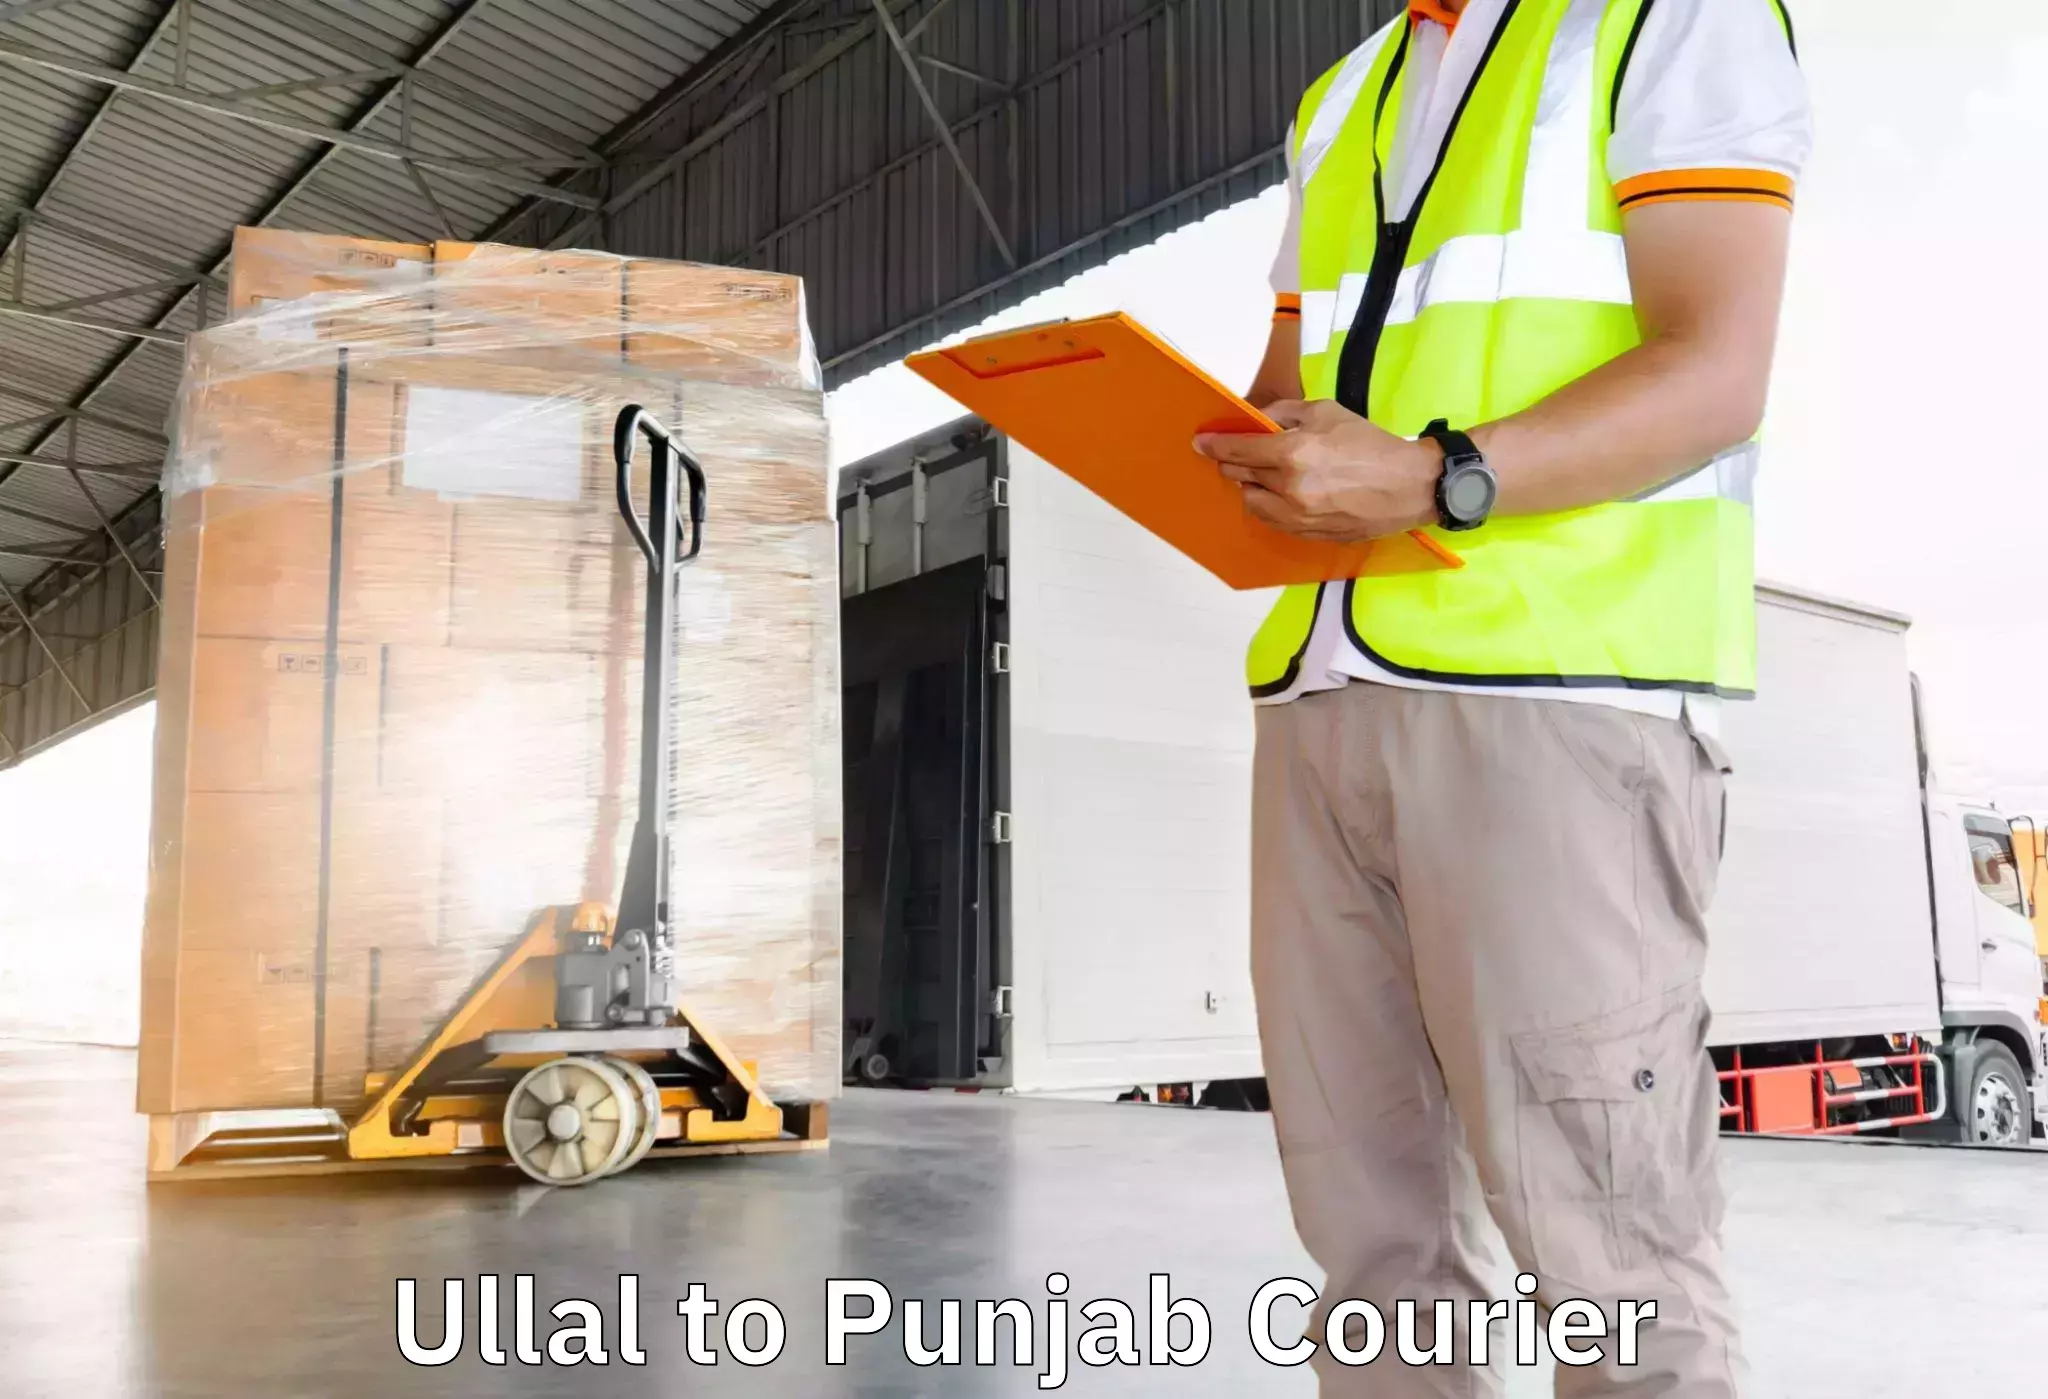 Furniture delivery service Ullal to Mansa